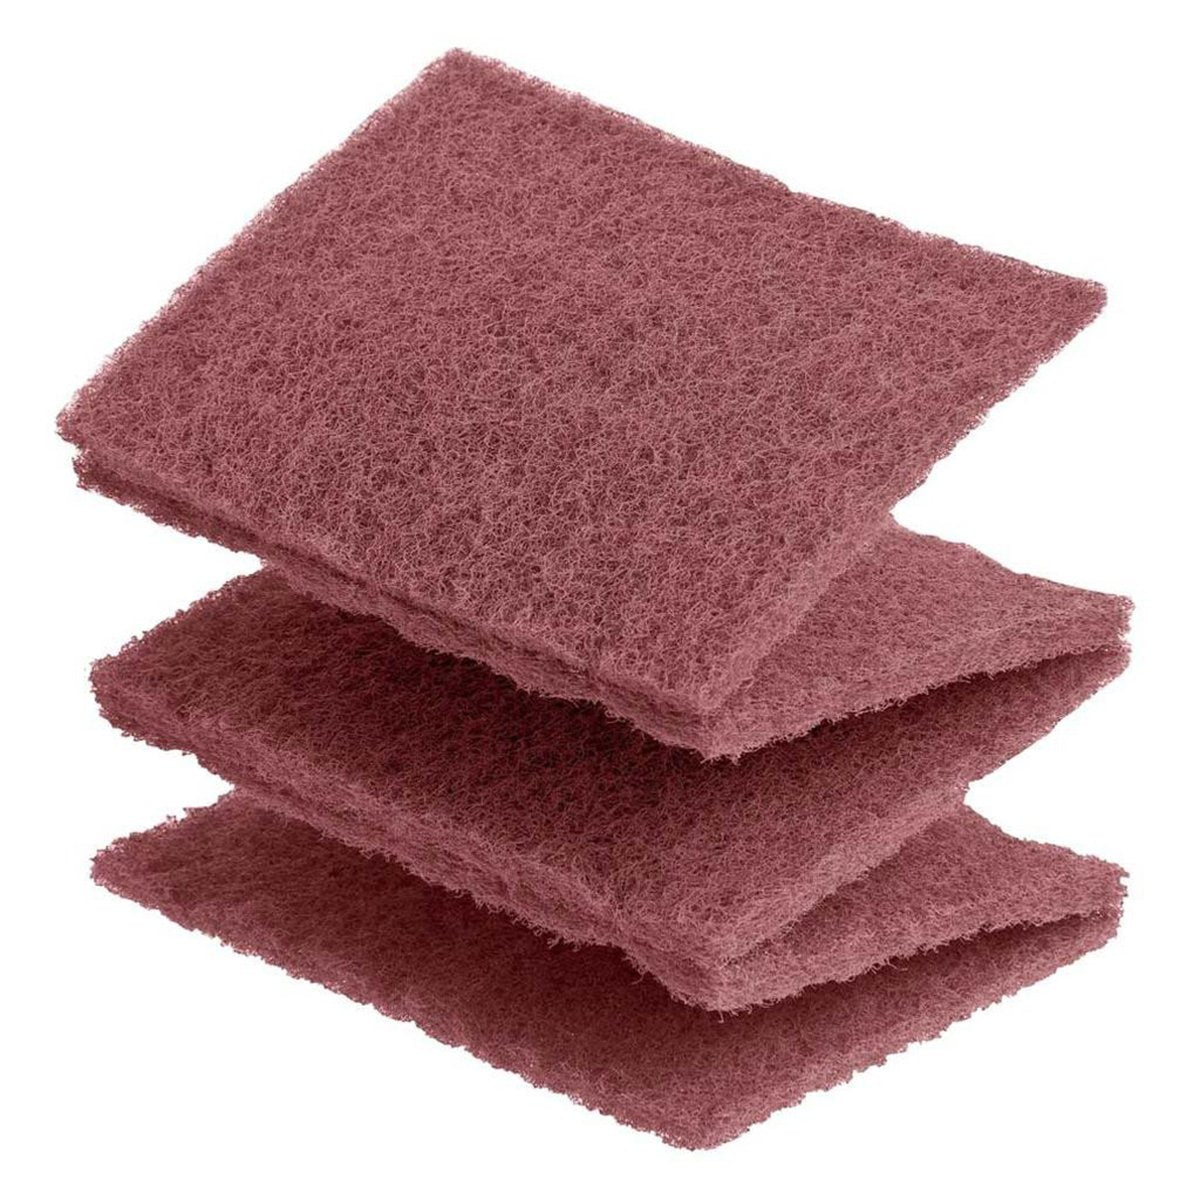 Maroon-coloured Vlies is a fine synthetic woven abrasive. It comes in 115x152mm pads that can be torn off.